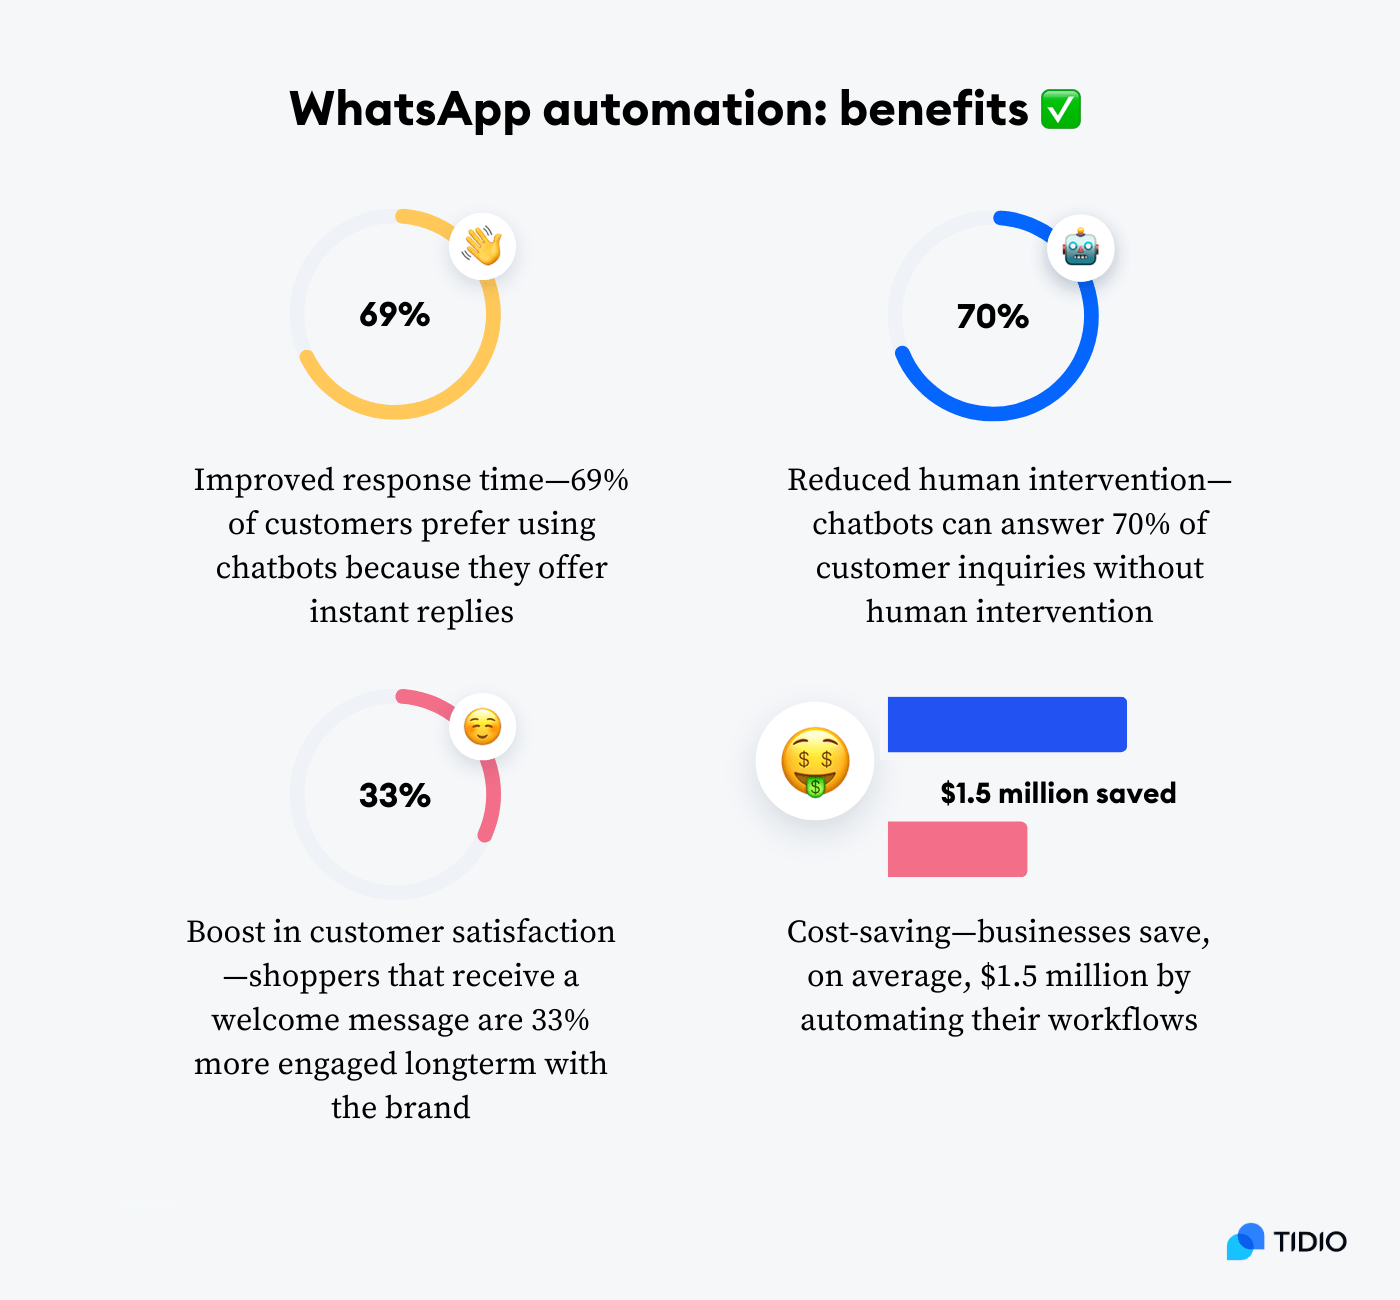 Benefits of WhatsApp automation listed on image